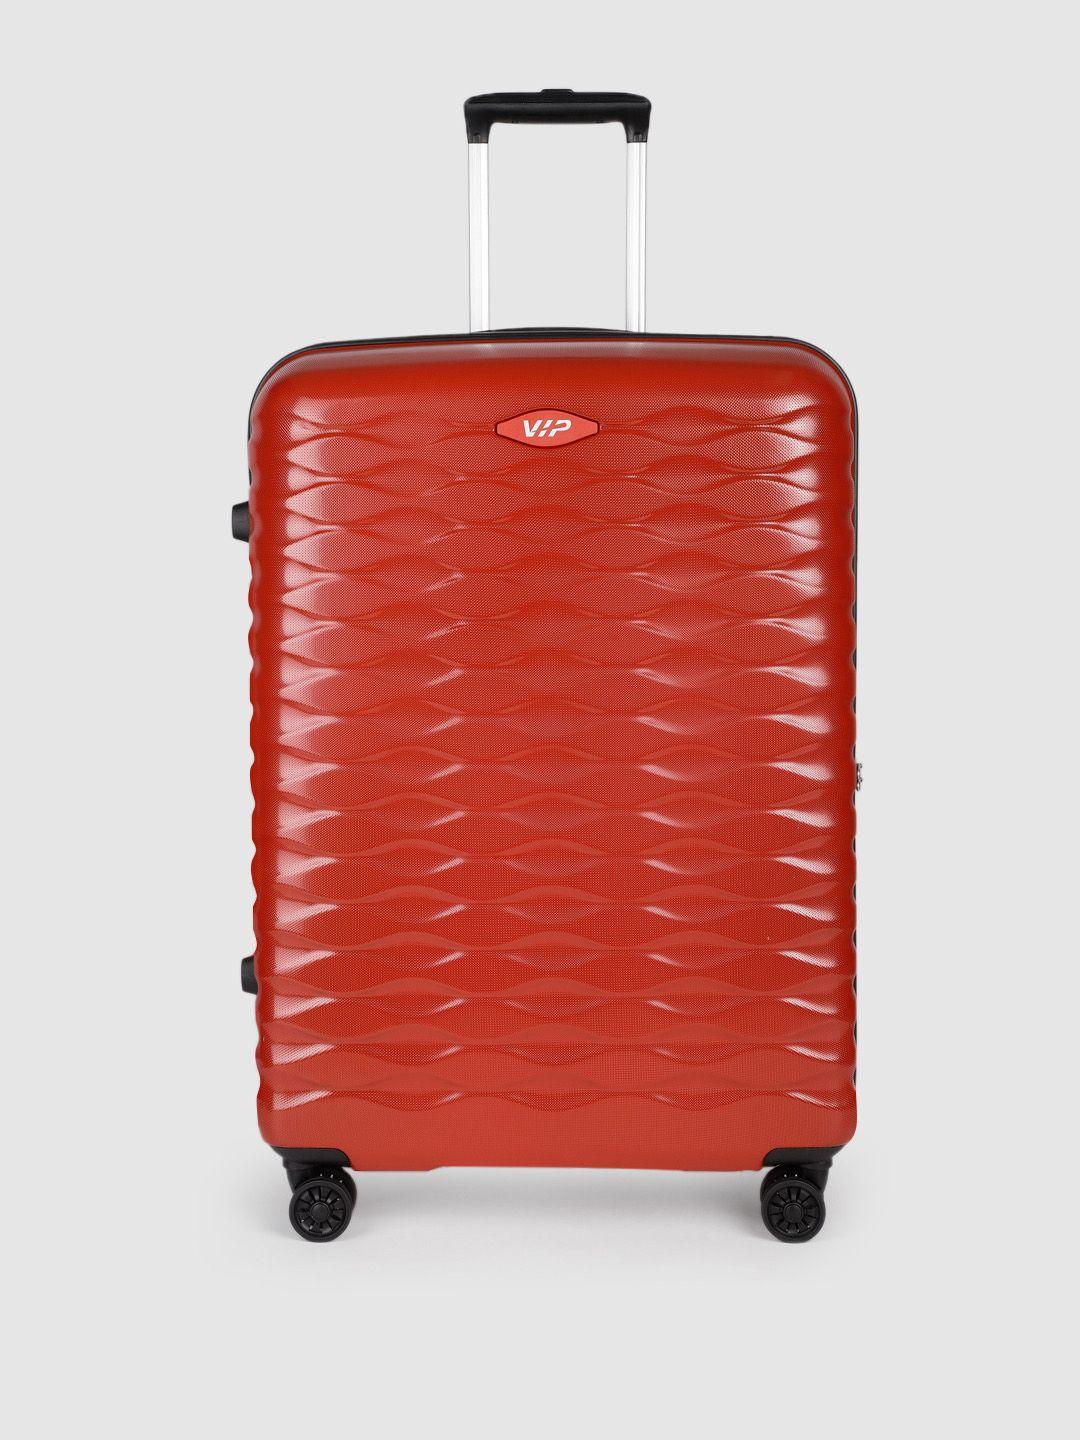 vip red textured foxtrot avt- anti viral coated luggage large trolley suitcase